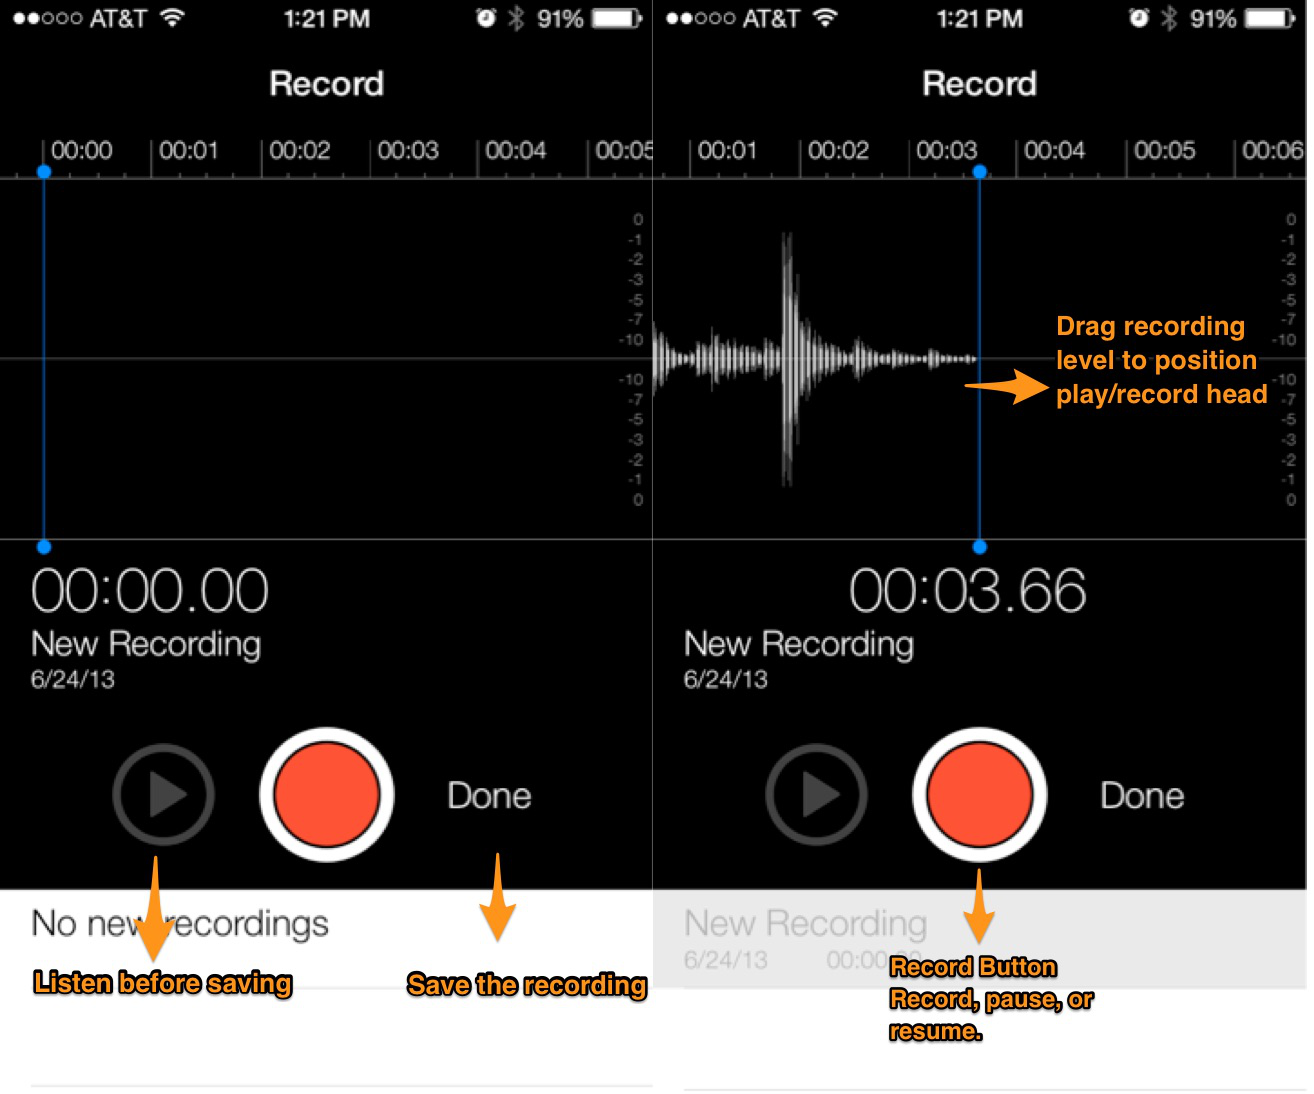 The interface of Voice Memos on iPhone